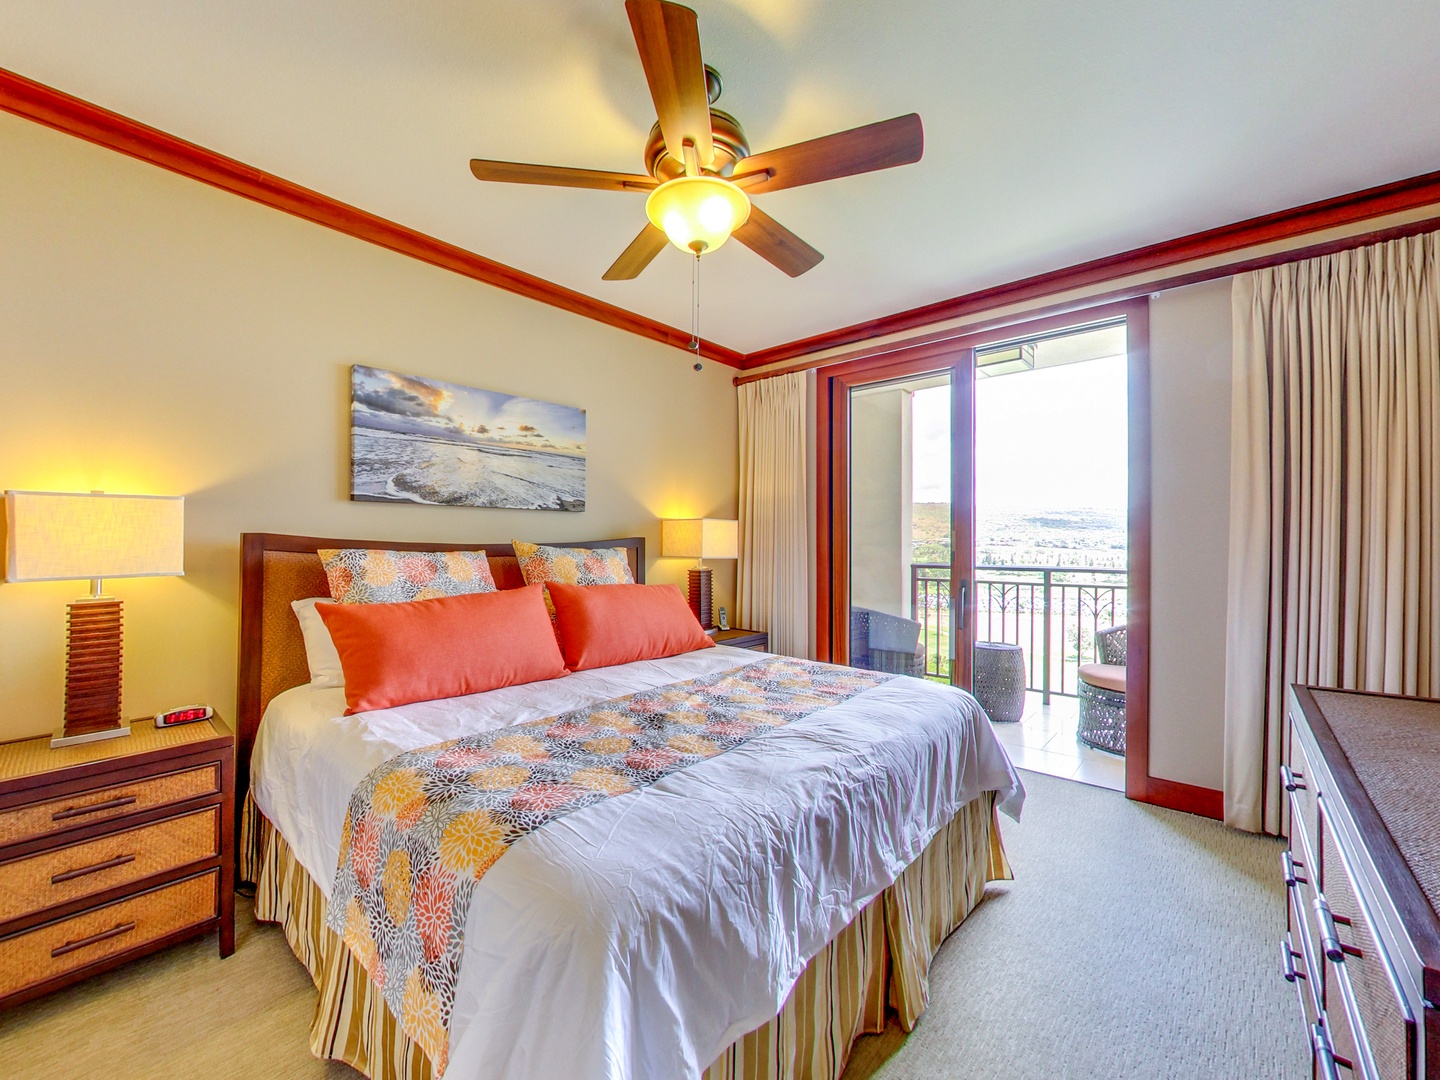 Kapolei Vacation Rentals, Ko Olina Beach Villas O1402 - The primary bedroom with lanai, ceiling fan, and captivating views.